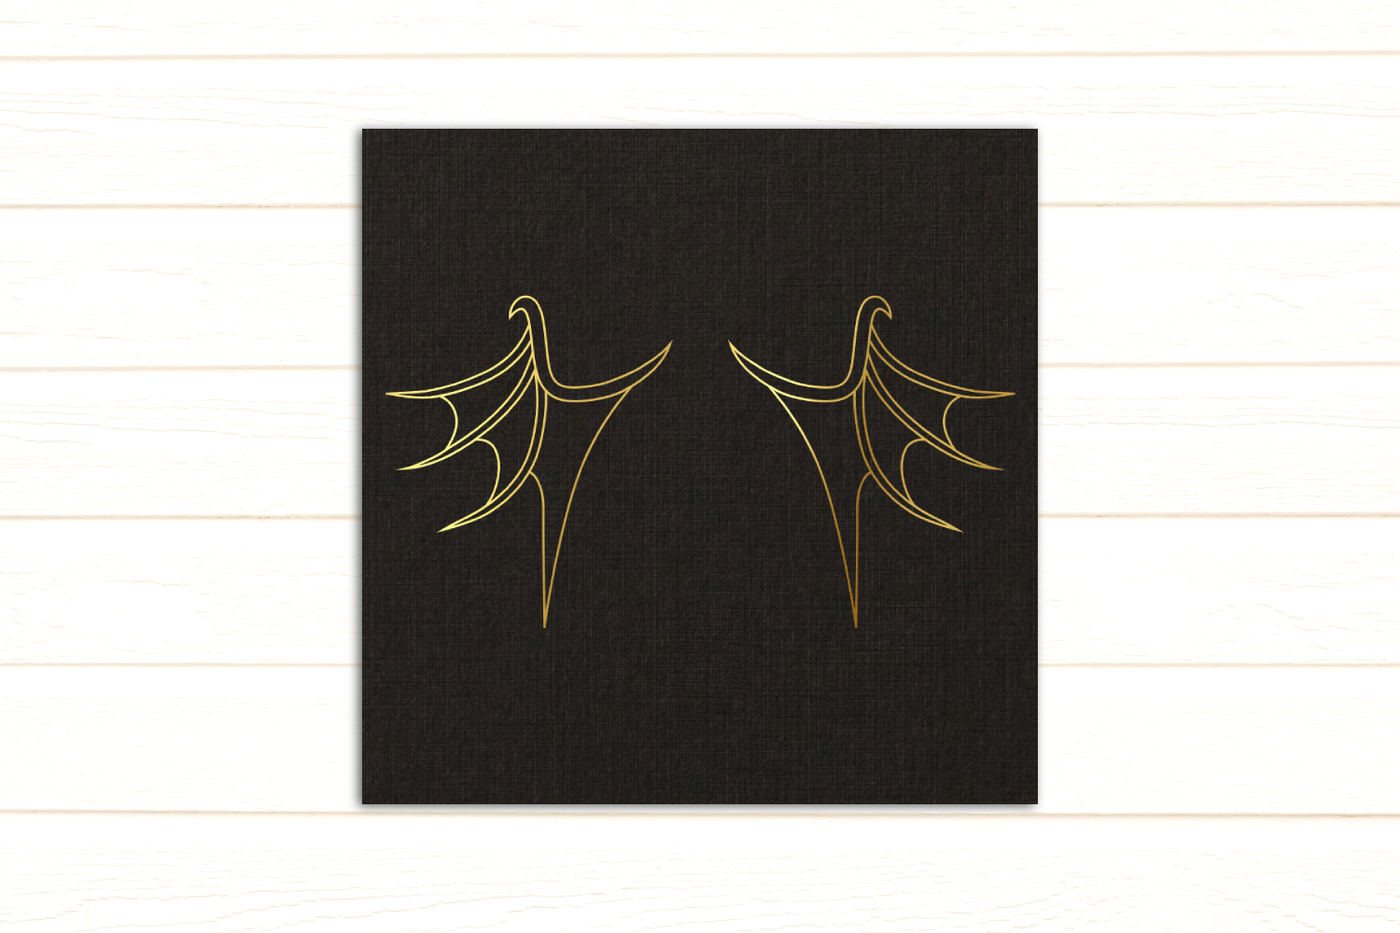 Line drawing of dragon wings on gold foil on black paper.